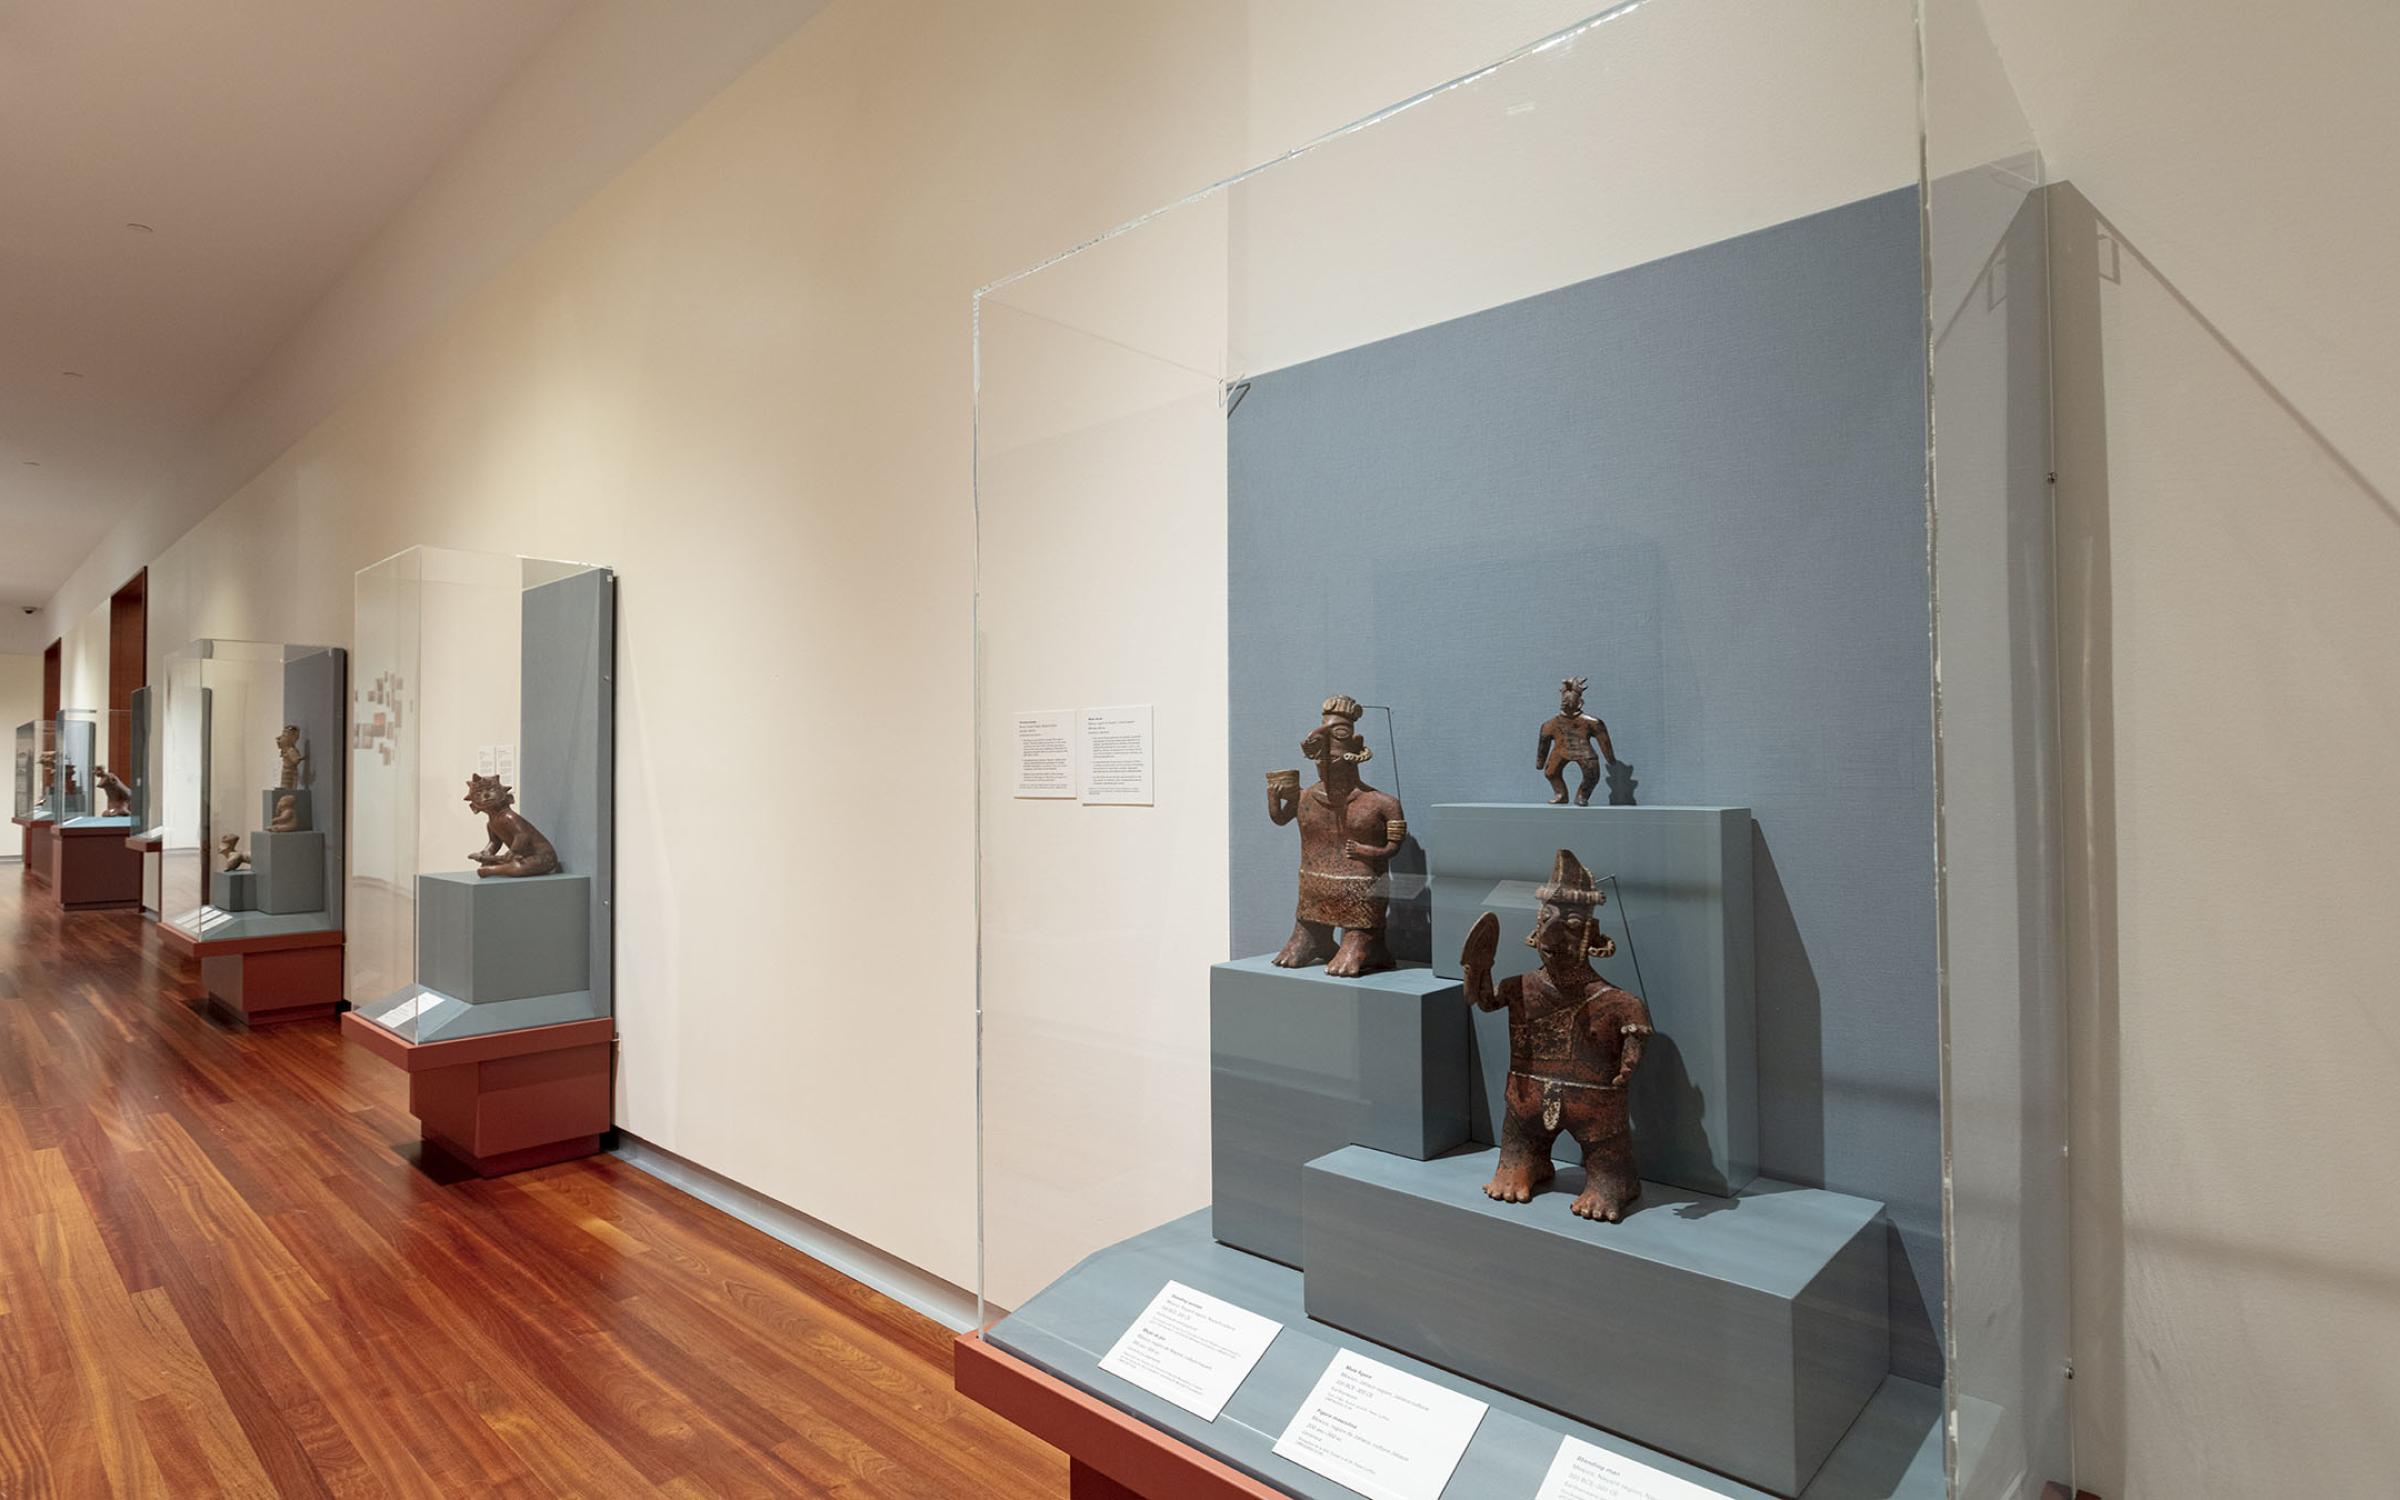 Small, carved figures stand in a glass display case against a white wall. There are multiple similar display cases going down the wall in the background.